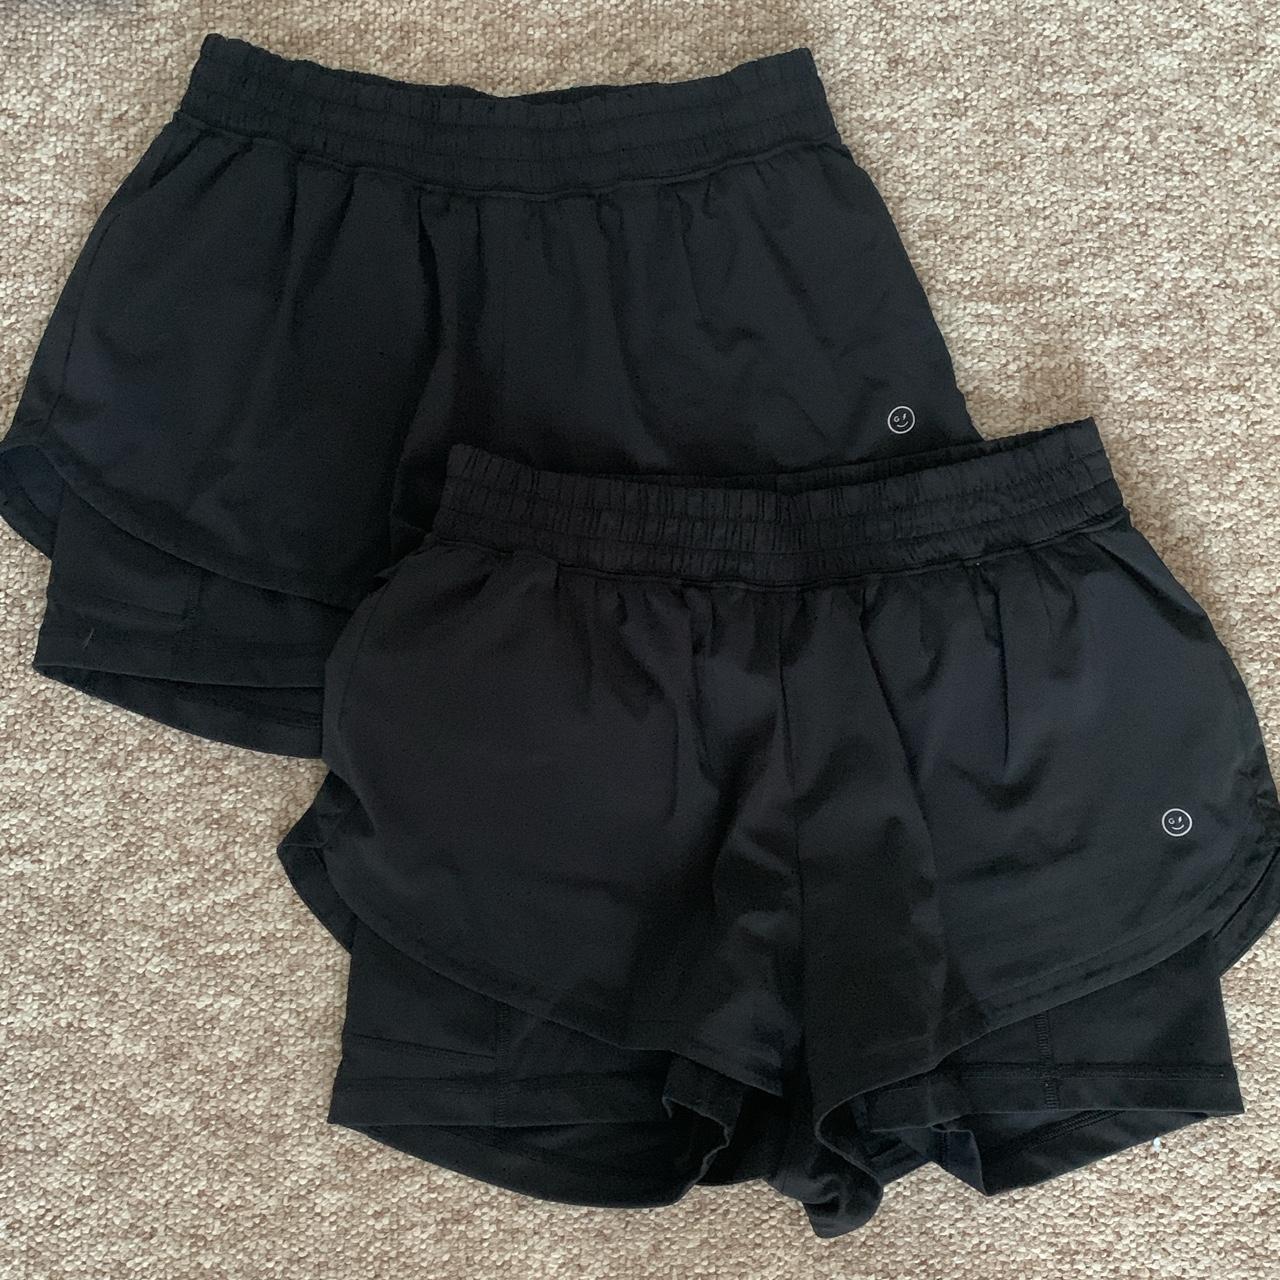 Hollister/gilly hicks shorts Black double layer... - Depop